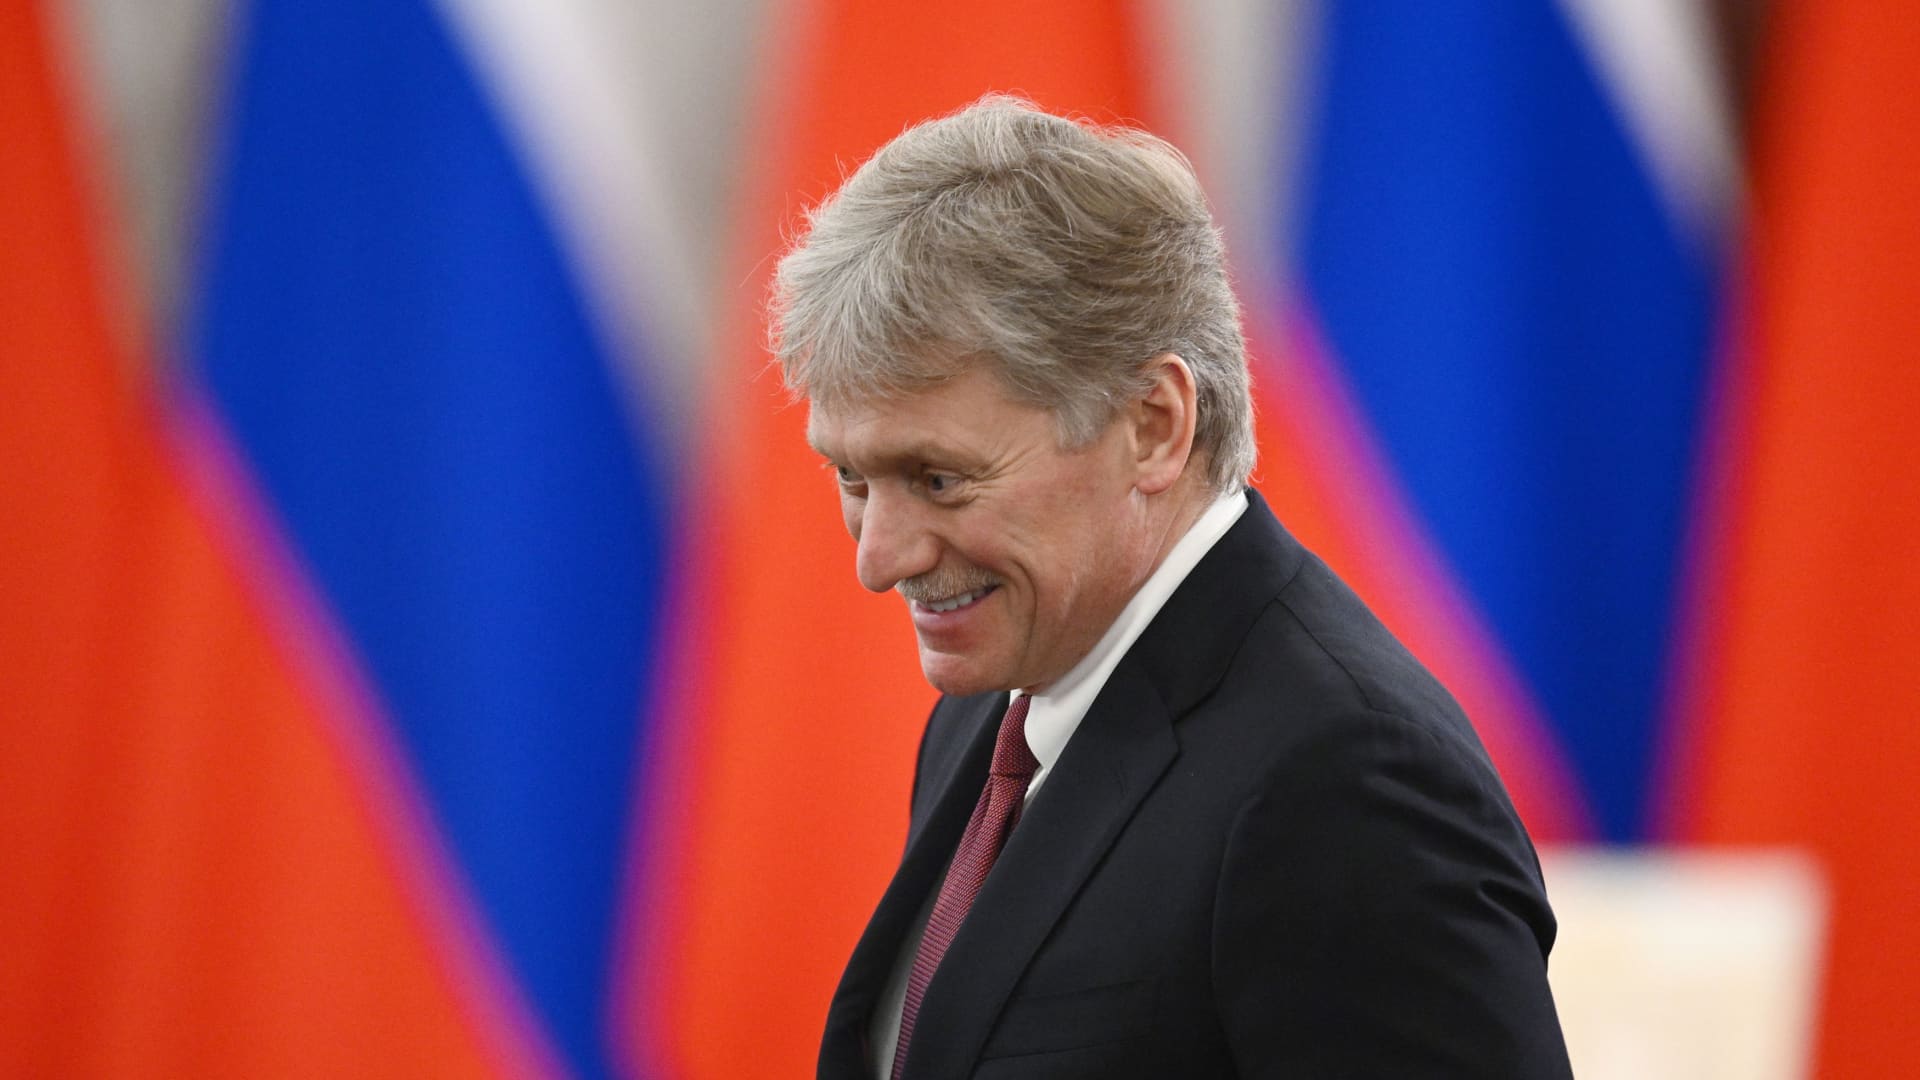 Kremlin spokesman Dmitry Peskov waits before a signing ceremony following talks of Russian President Vladimir Putin and Chinese President Xi Jinping at the Kremlin in Moscow, Russia March 21, 2023. Sputnik/Vladimir Astapkovich/Kremlin via REUTERS ATTENTION EDITORS - THIS IMAGE WAS PROVIDED BY A THIRD PARTY.